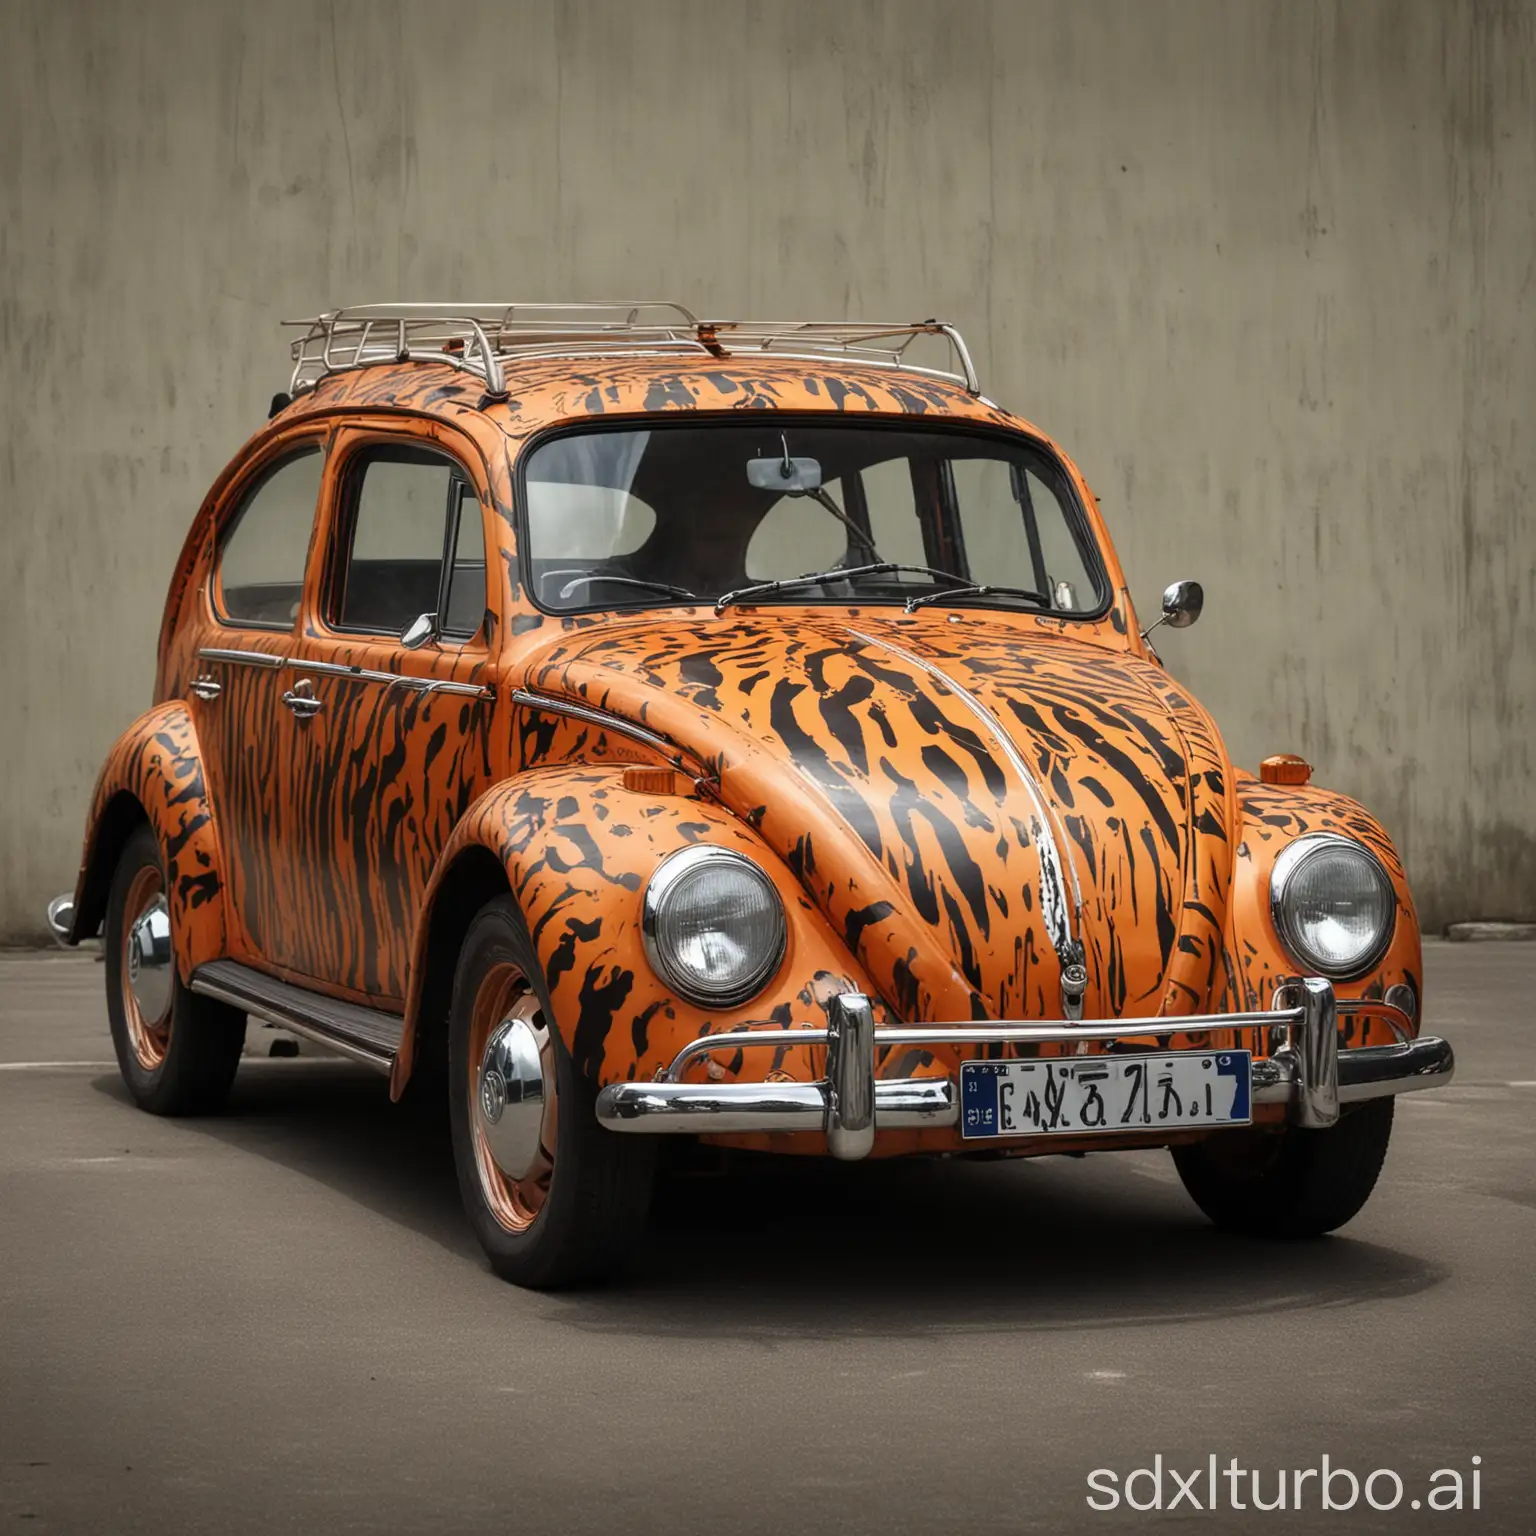 photographic style, Volkswagen Type1 painted like a tiger's coat